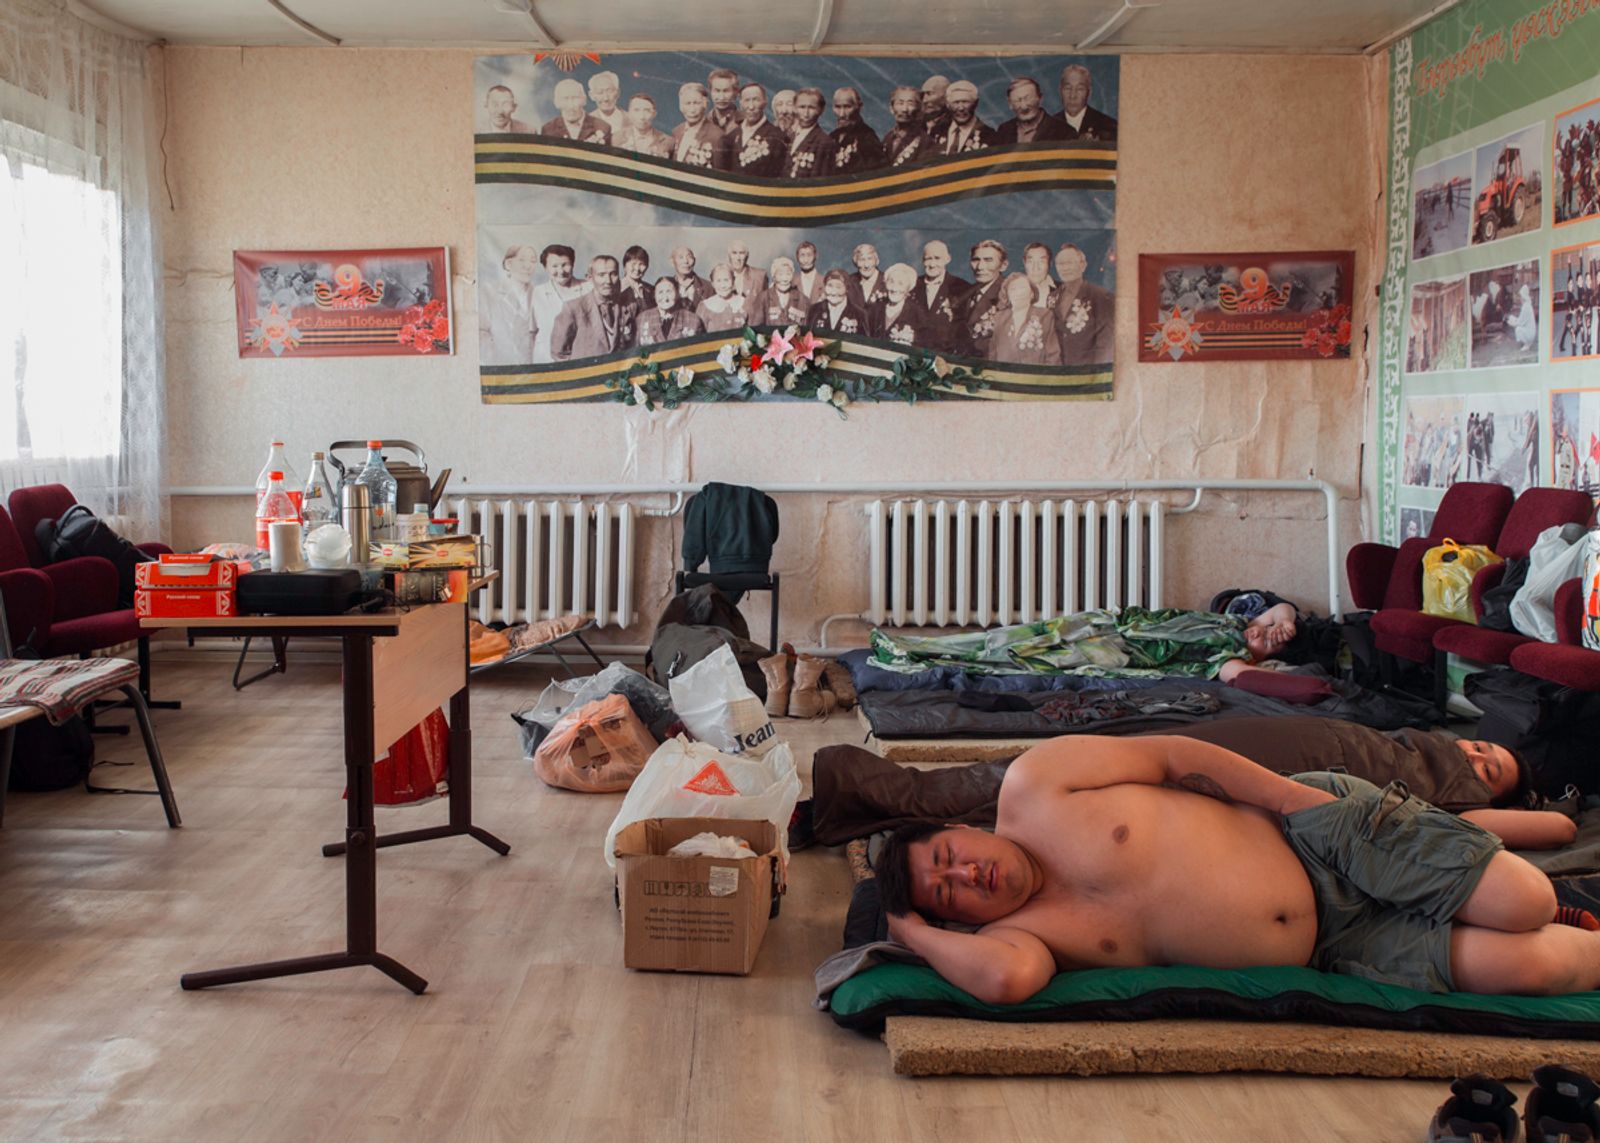 © Alexey Vasilyev - The crew is resting after a shift at the base, in the building of the club Magaras village, Gornyi ulus.